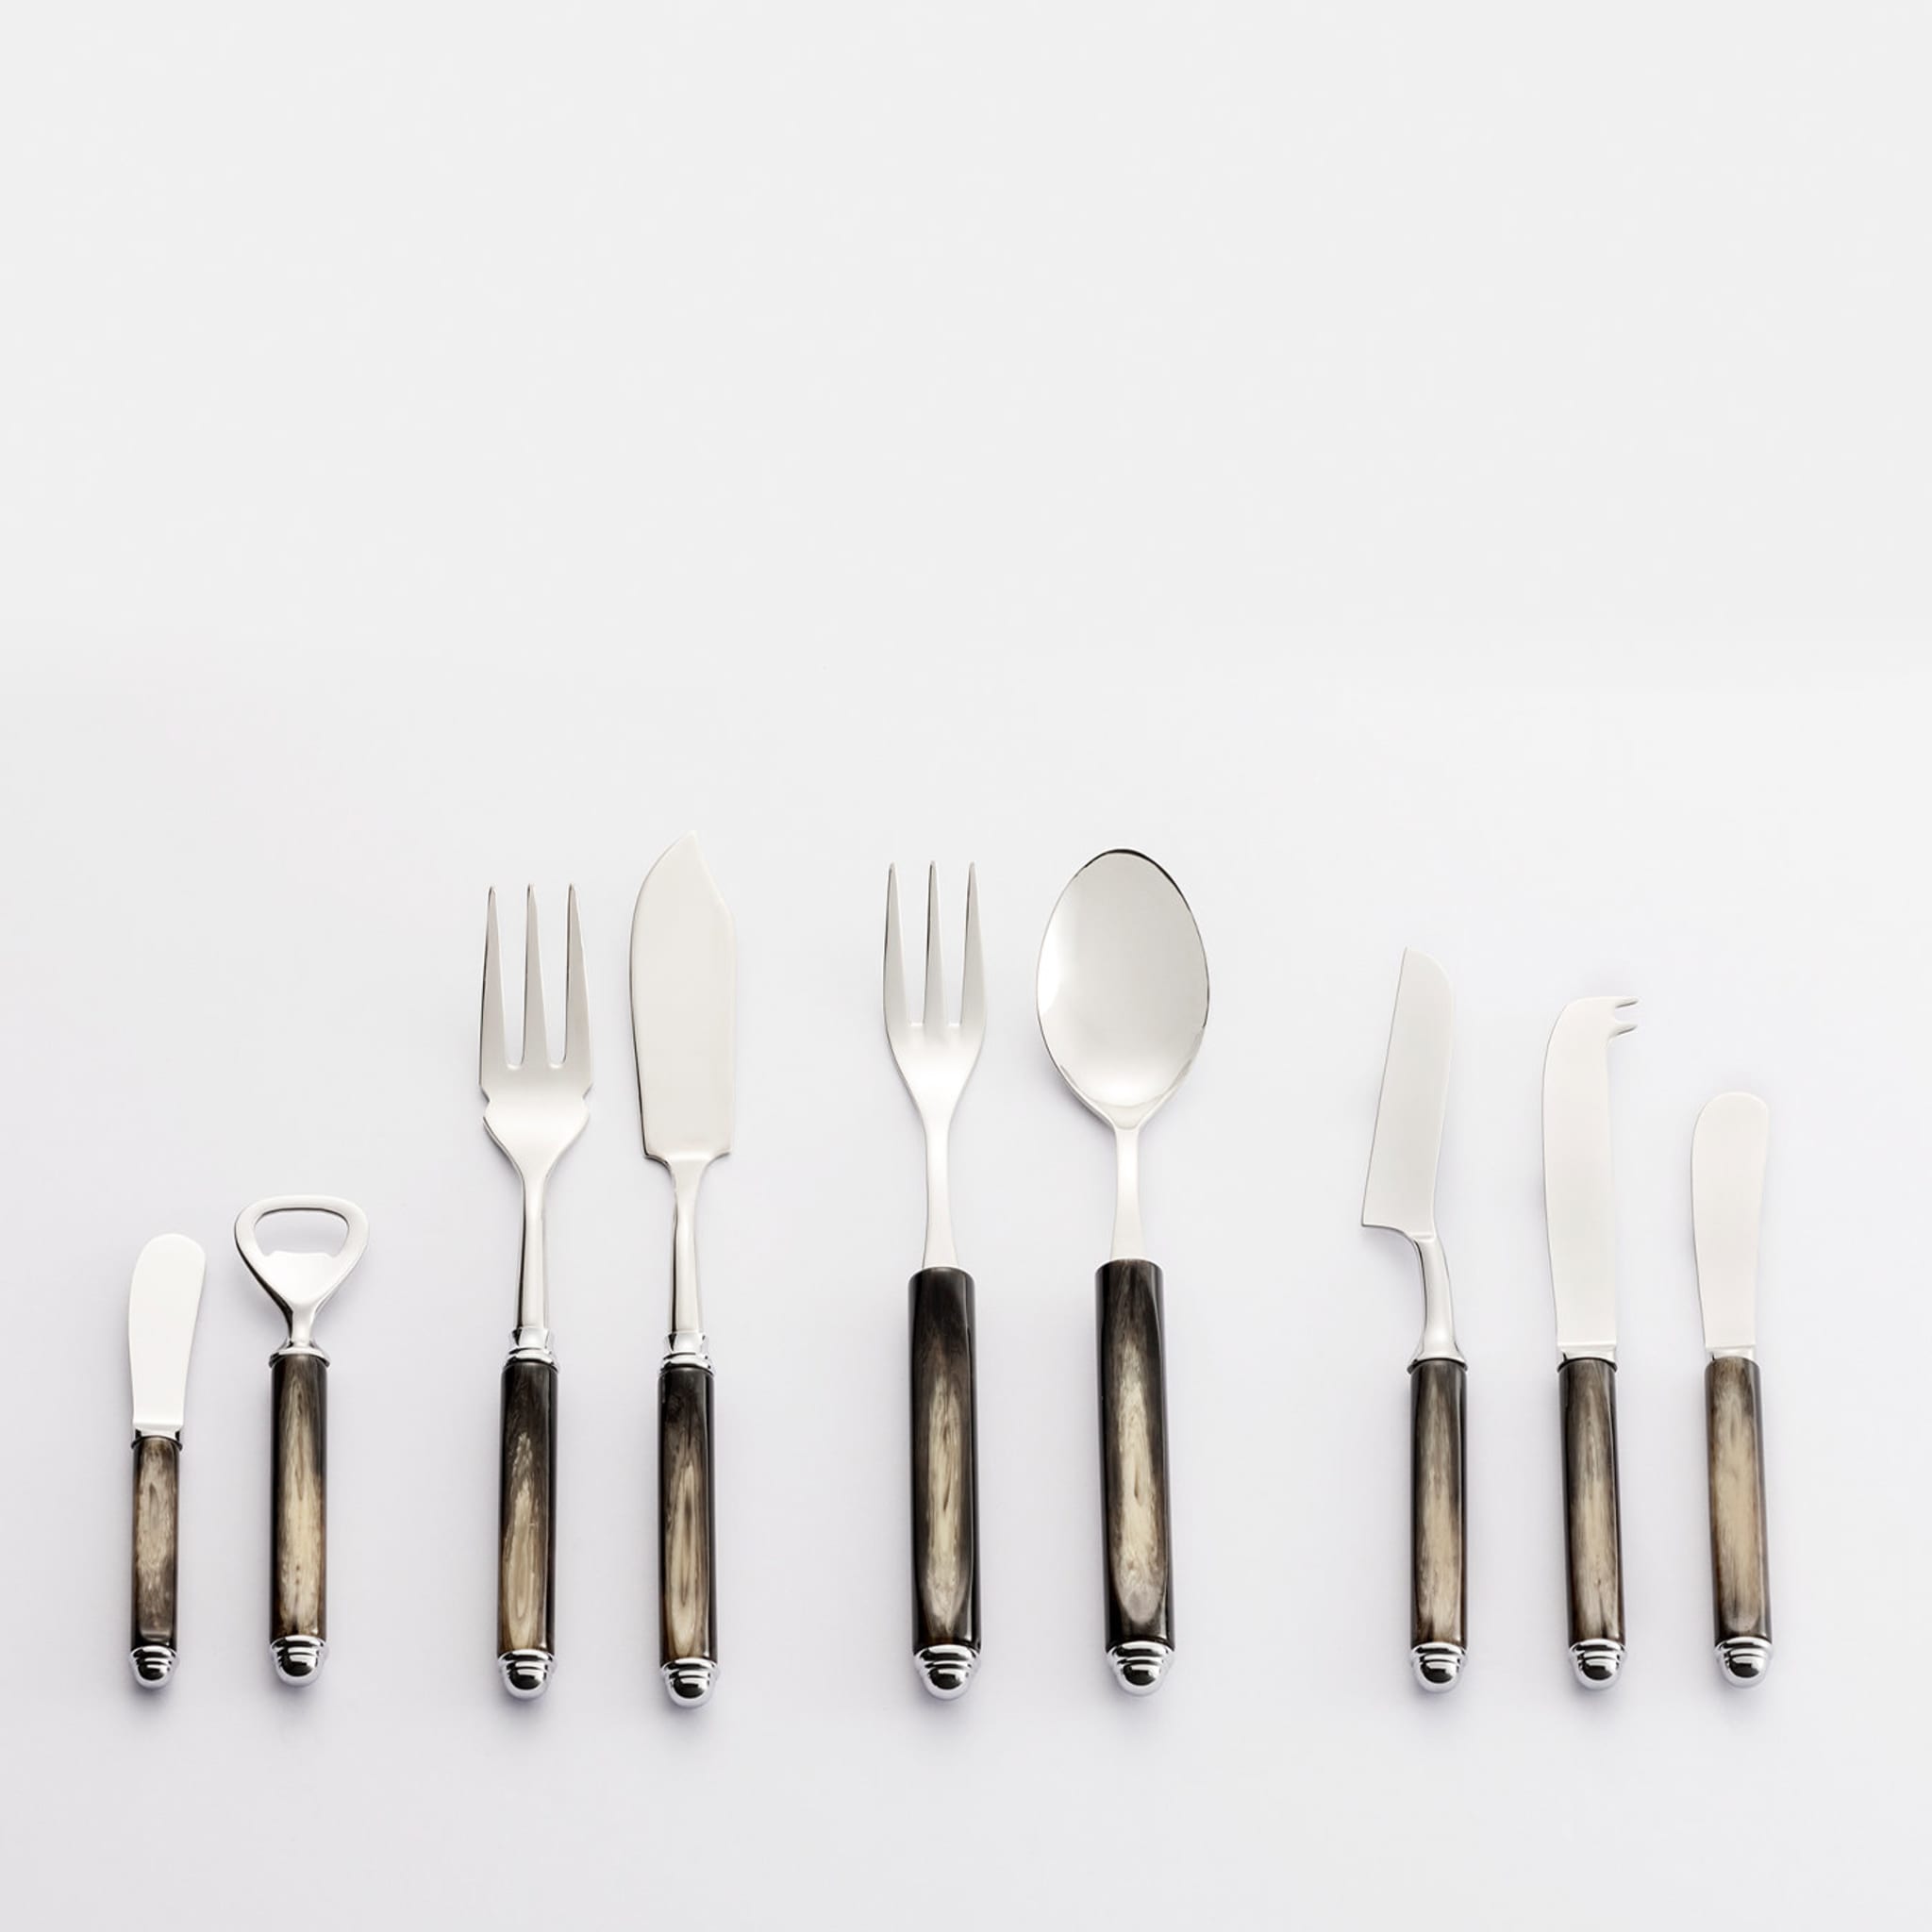 Zambia Set of Serving Cutlery - Alternative view 1